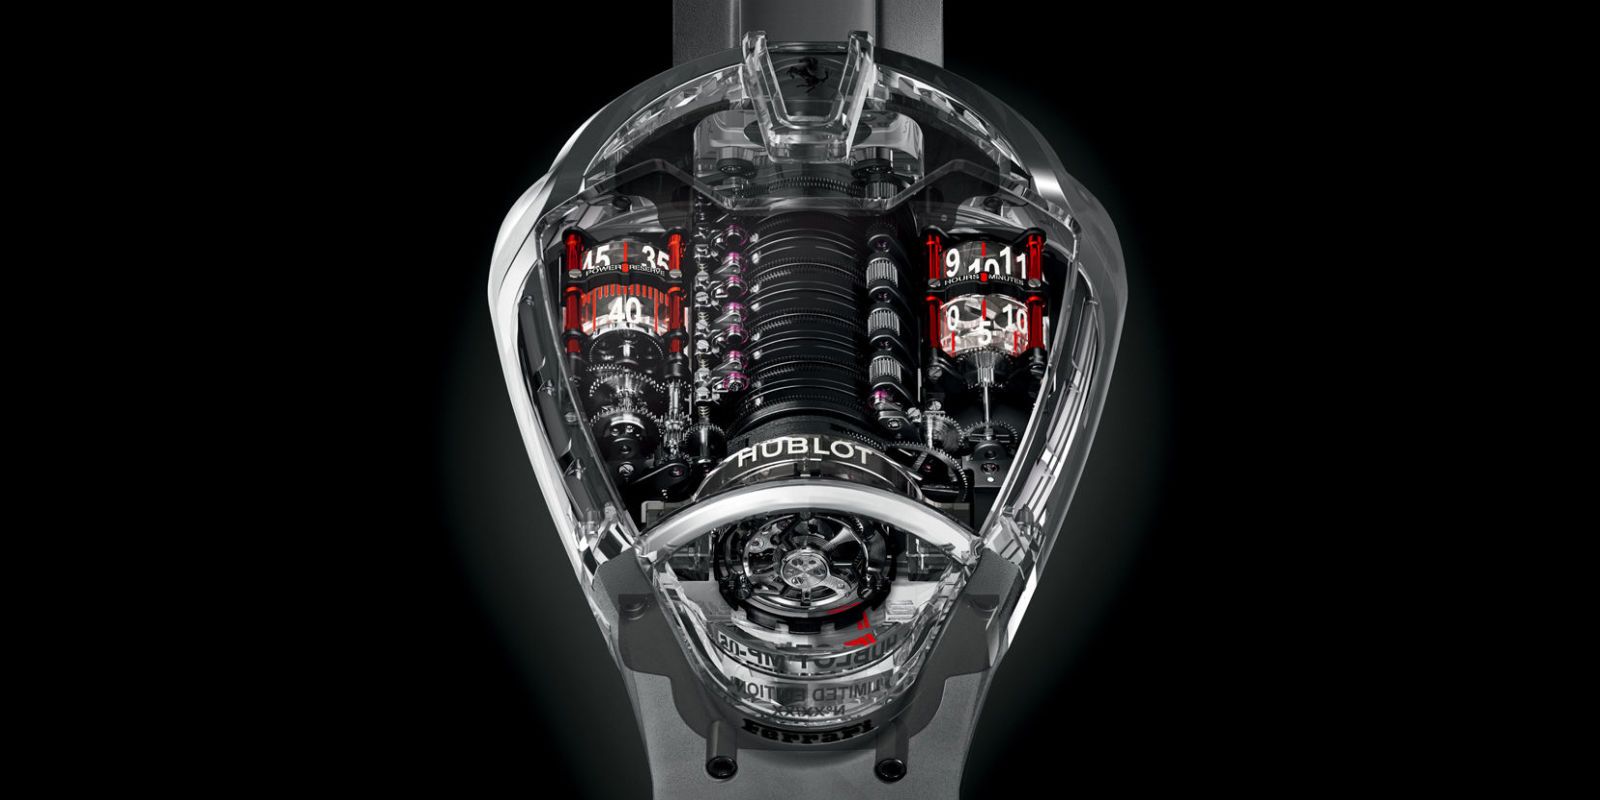 MP-05 LA FERRARI APERTA, REF 905.JN.0001.RX LIMITED EDITION BLACK SAPPHIRE  SKELETONIZED TOURBILLON WRISTWATCH WITH 50-DAY POWER RESERVE INDICATION  CIRCA 2017 | Important Watches Part II | 2020 | Sotheby's